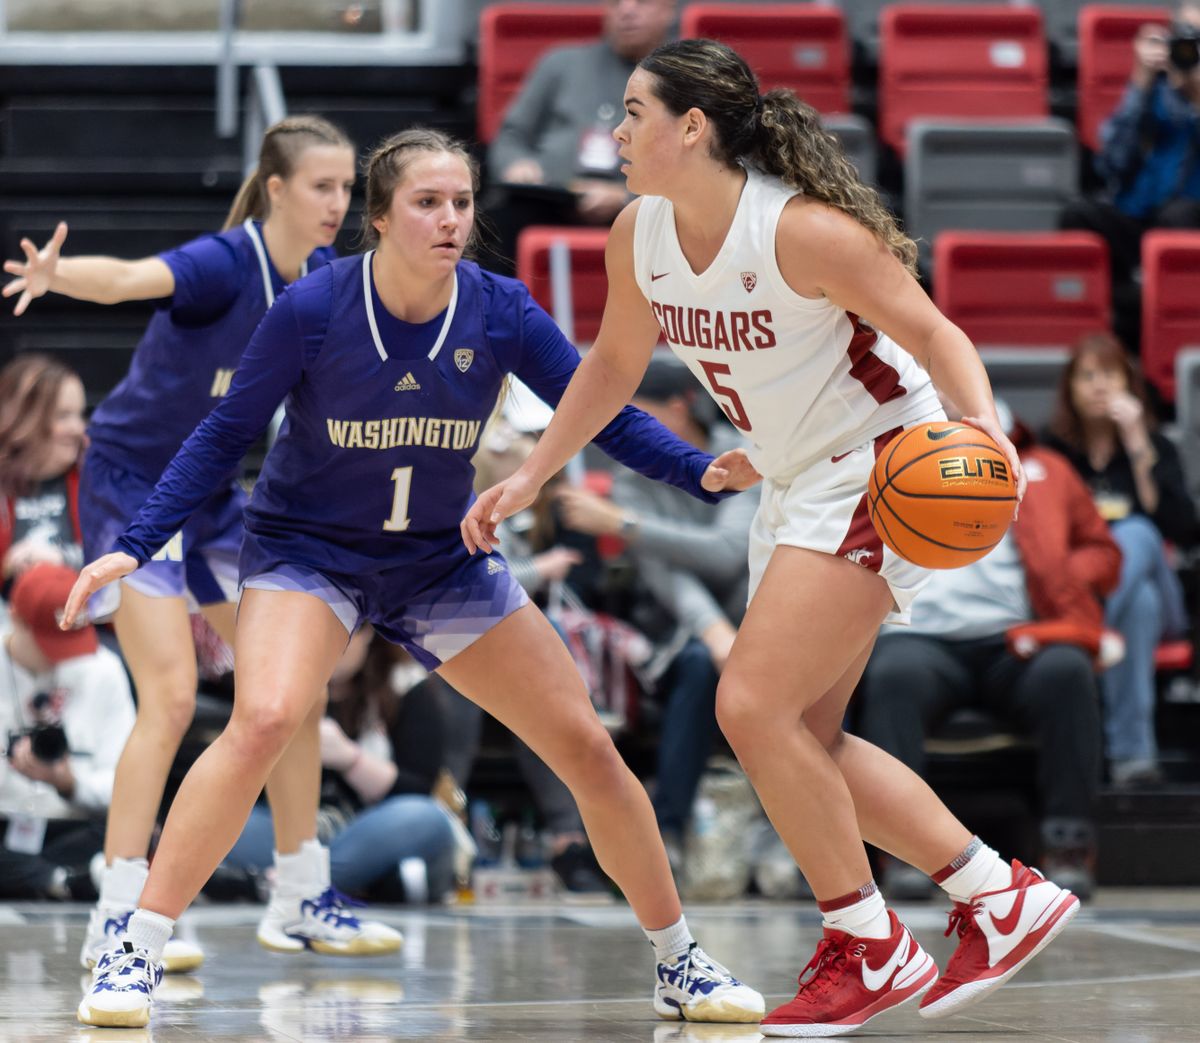 WSU guard Charlisse Leger-Walker, right, drives around Washington guard Hannah Stines in the first half on Sunday, Dec. 10, 2023 at Beasley Coliseum in Pullman, Wash.  (Geoff Crimmins/The Spokesman-Review)